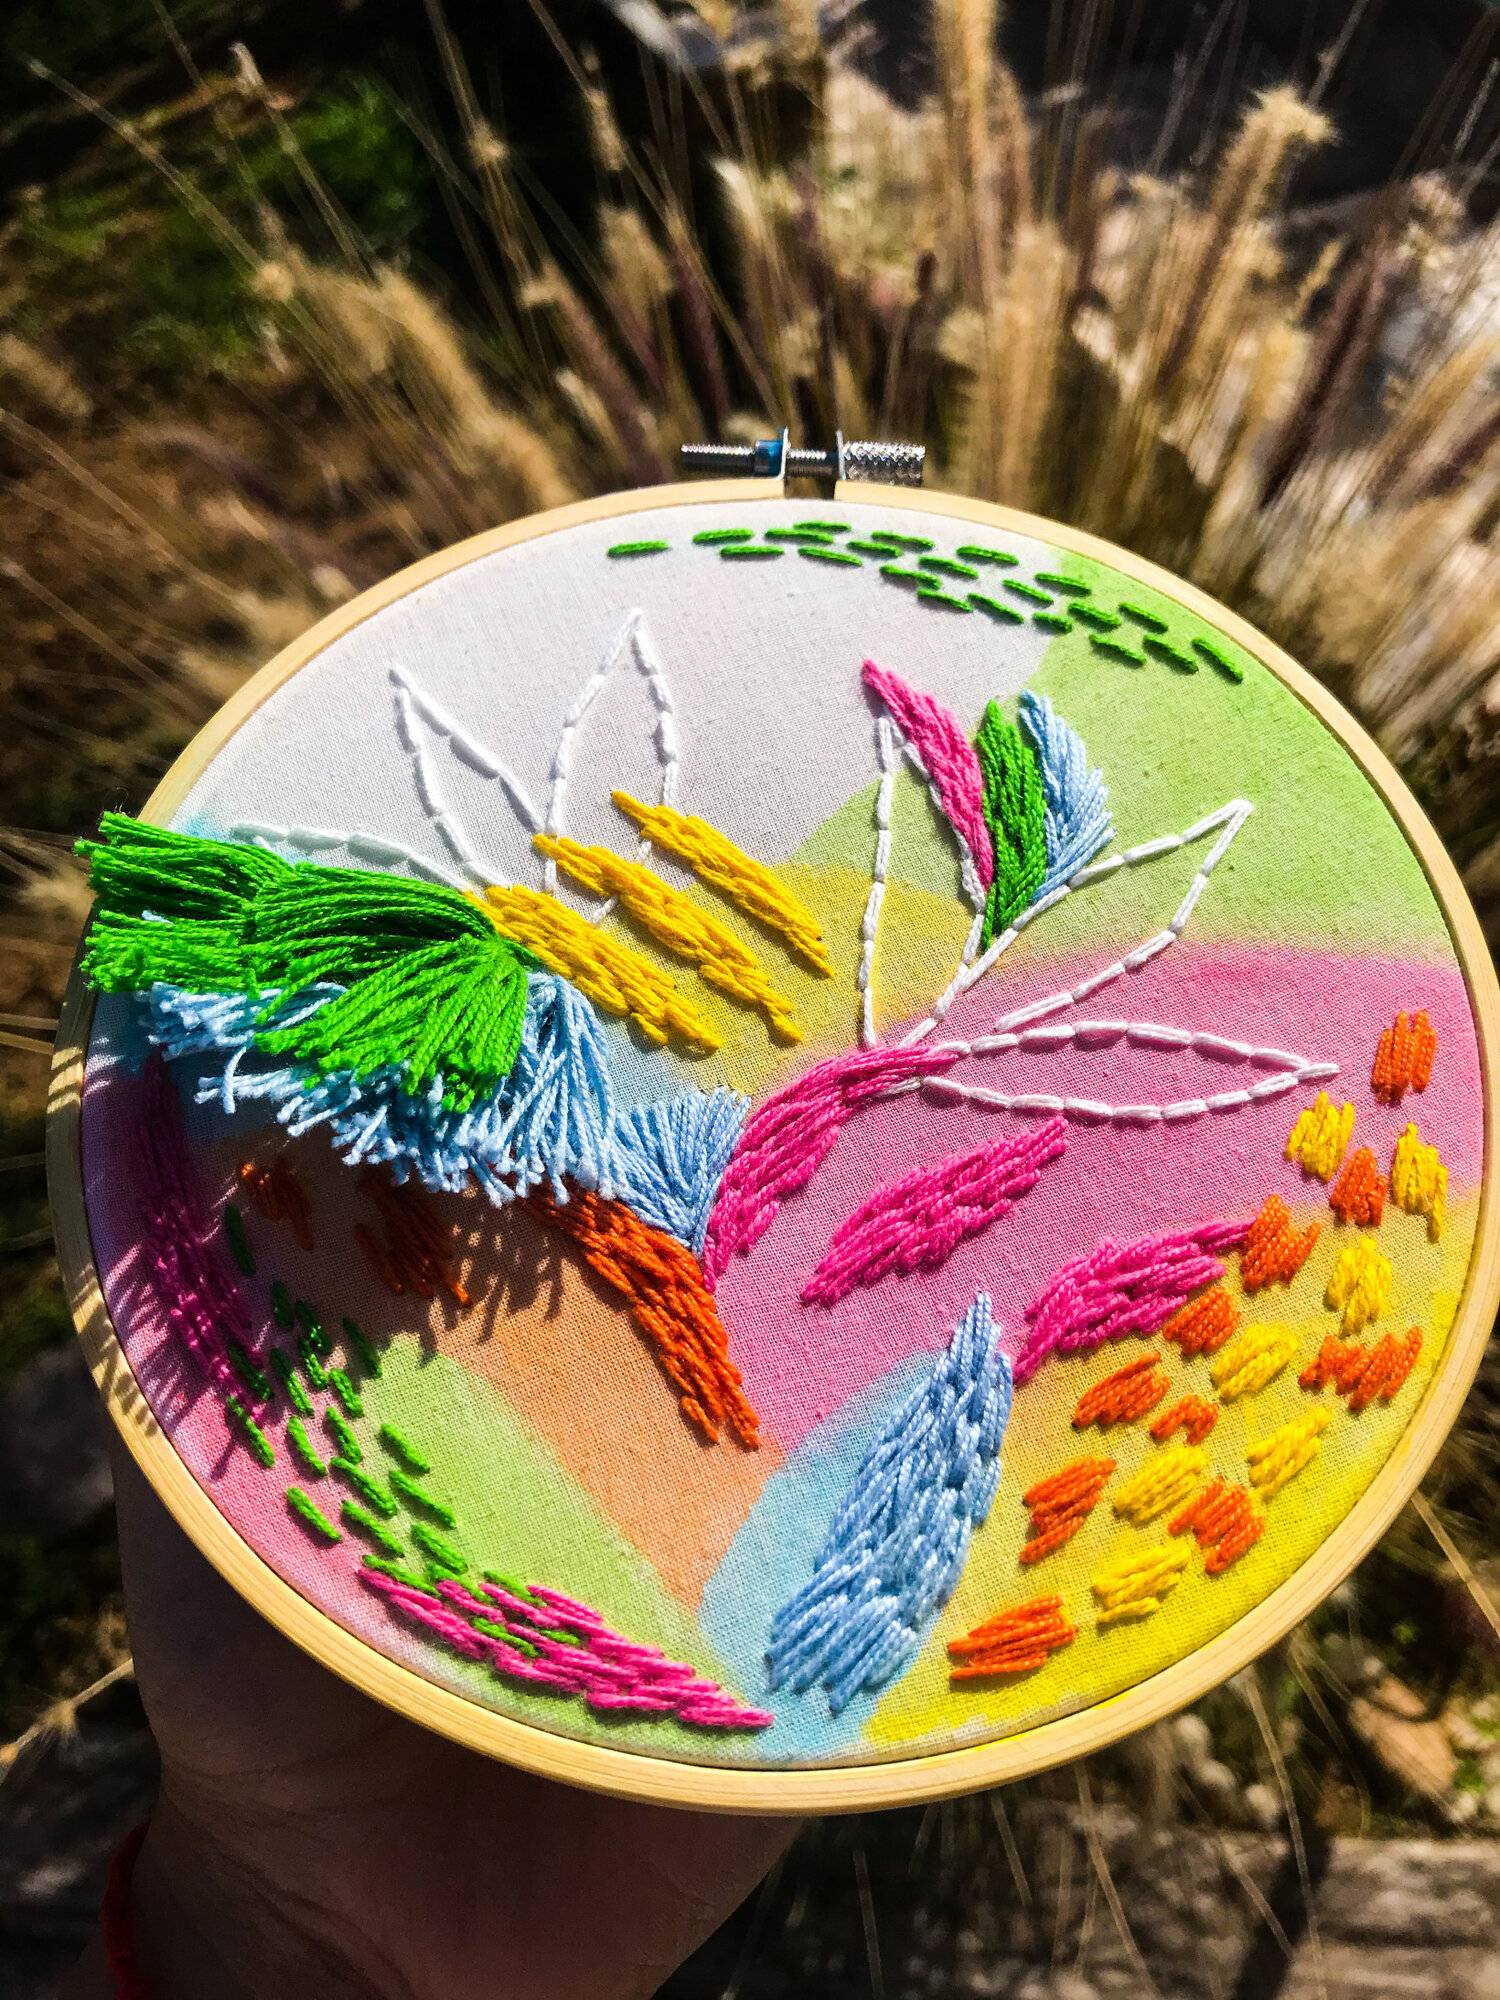 Watercolor Embroidery (Jing-an)